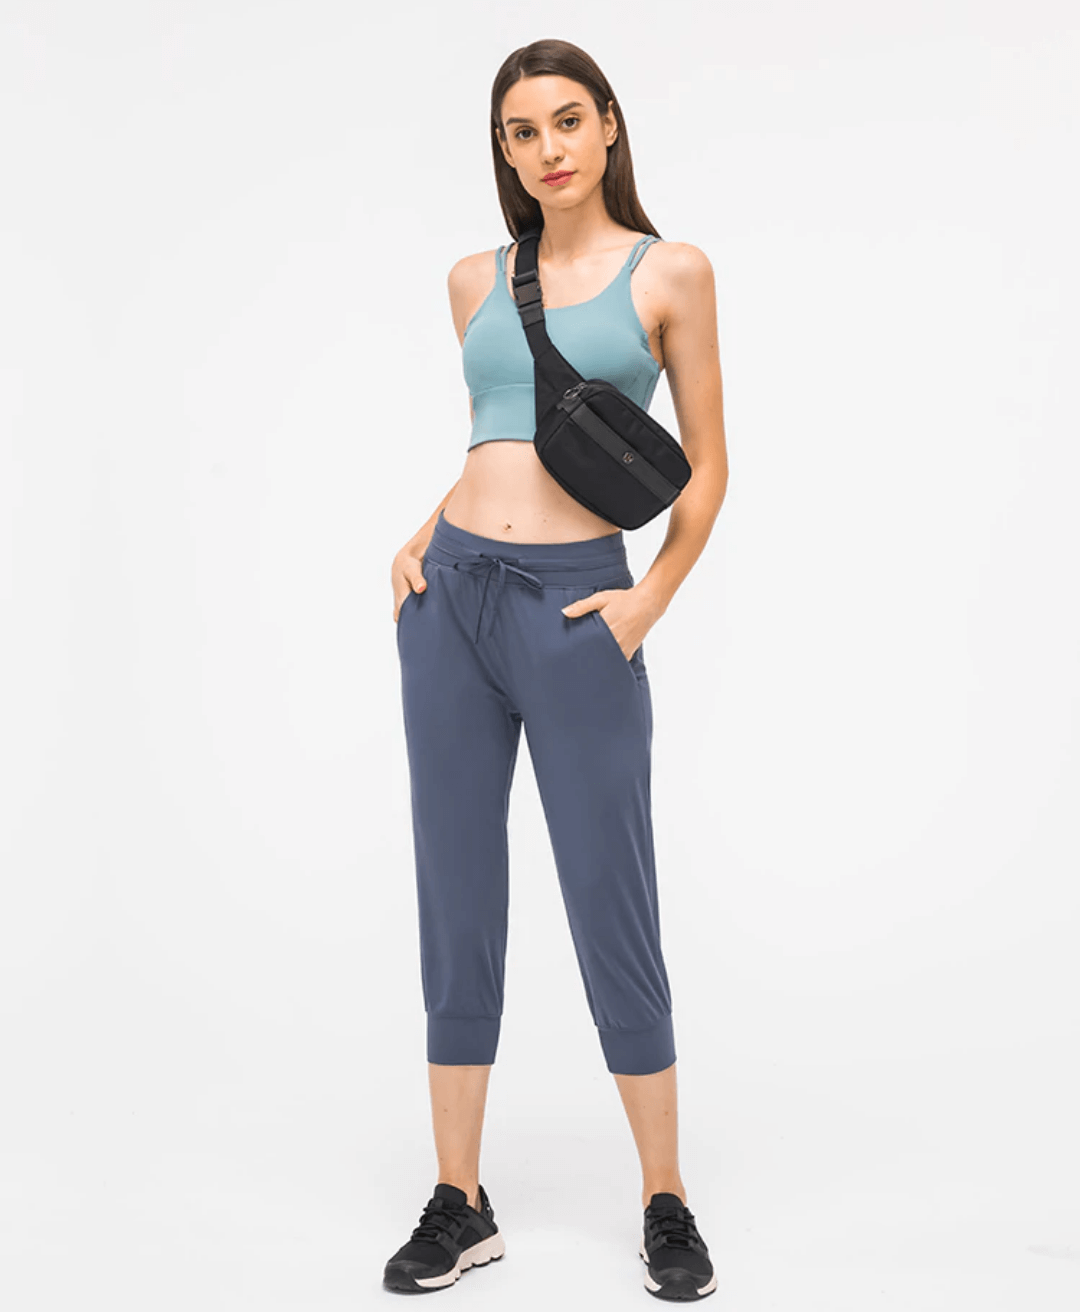 What's New at lululemon this week? Hopefully a matching jogger set.